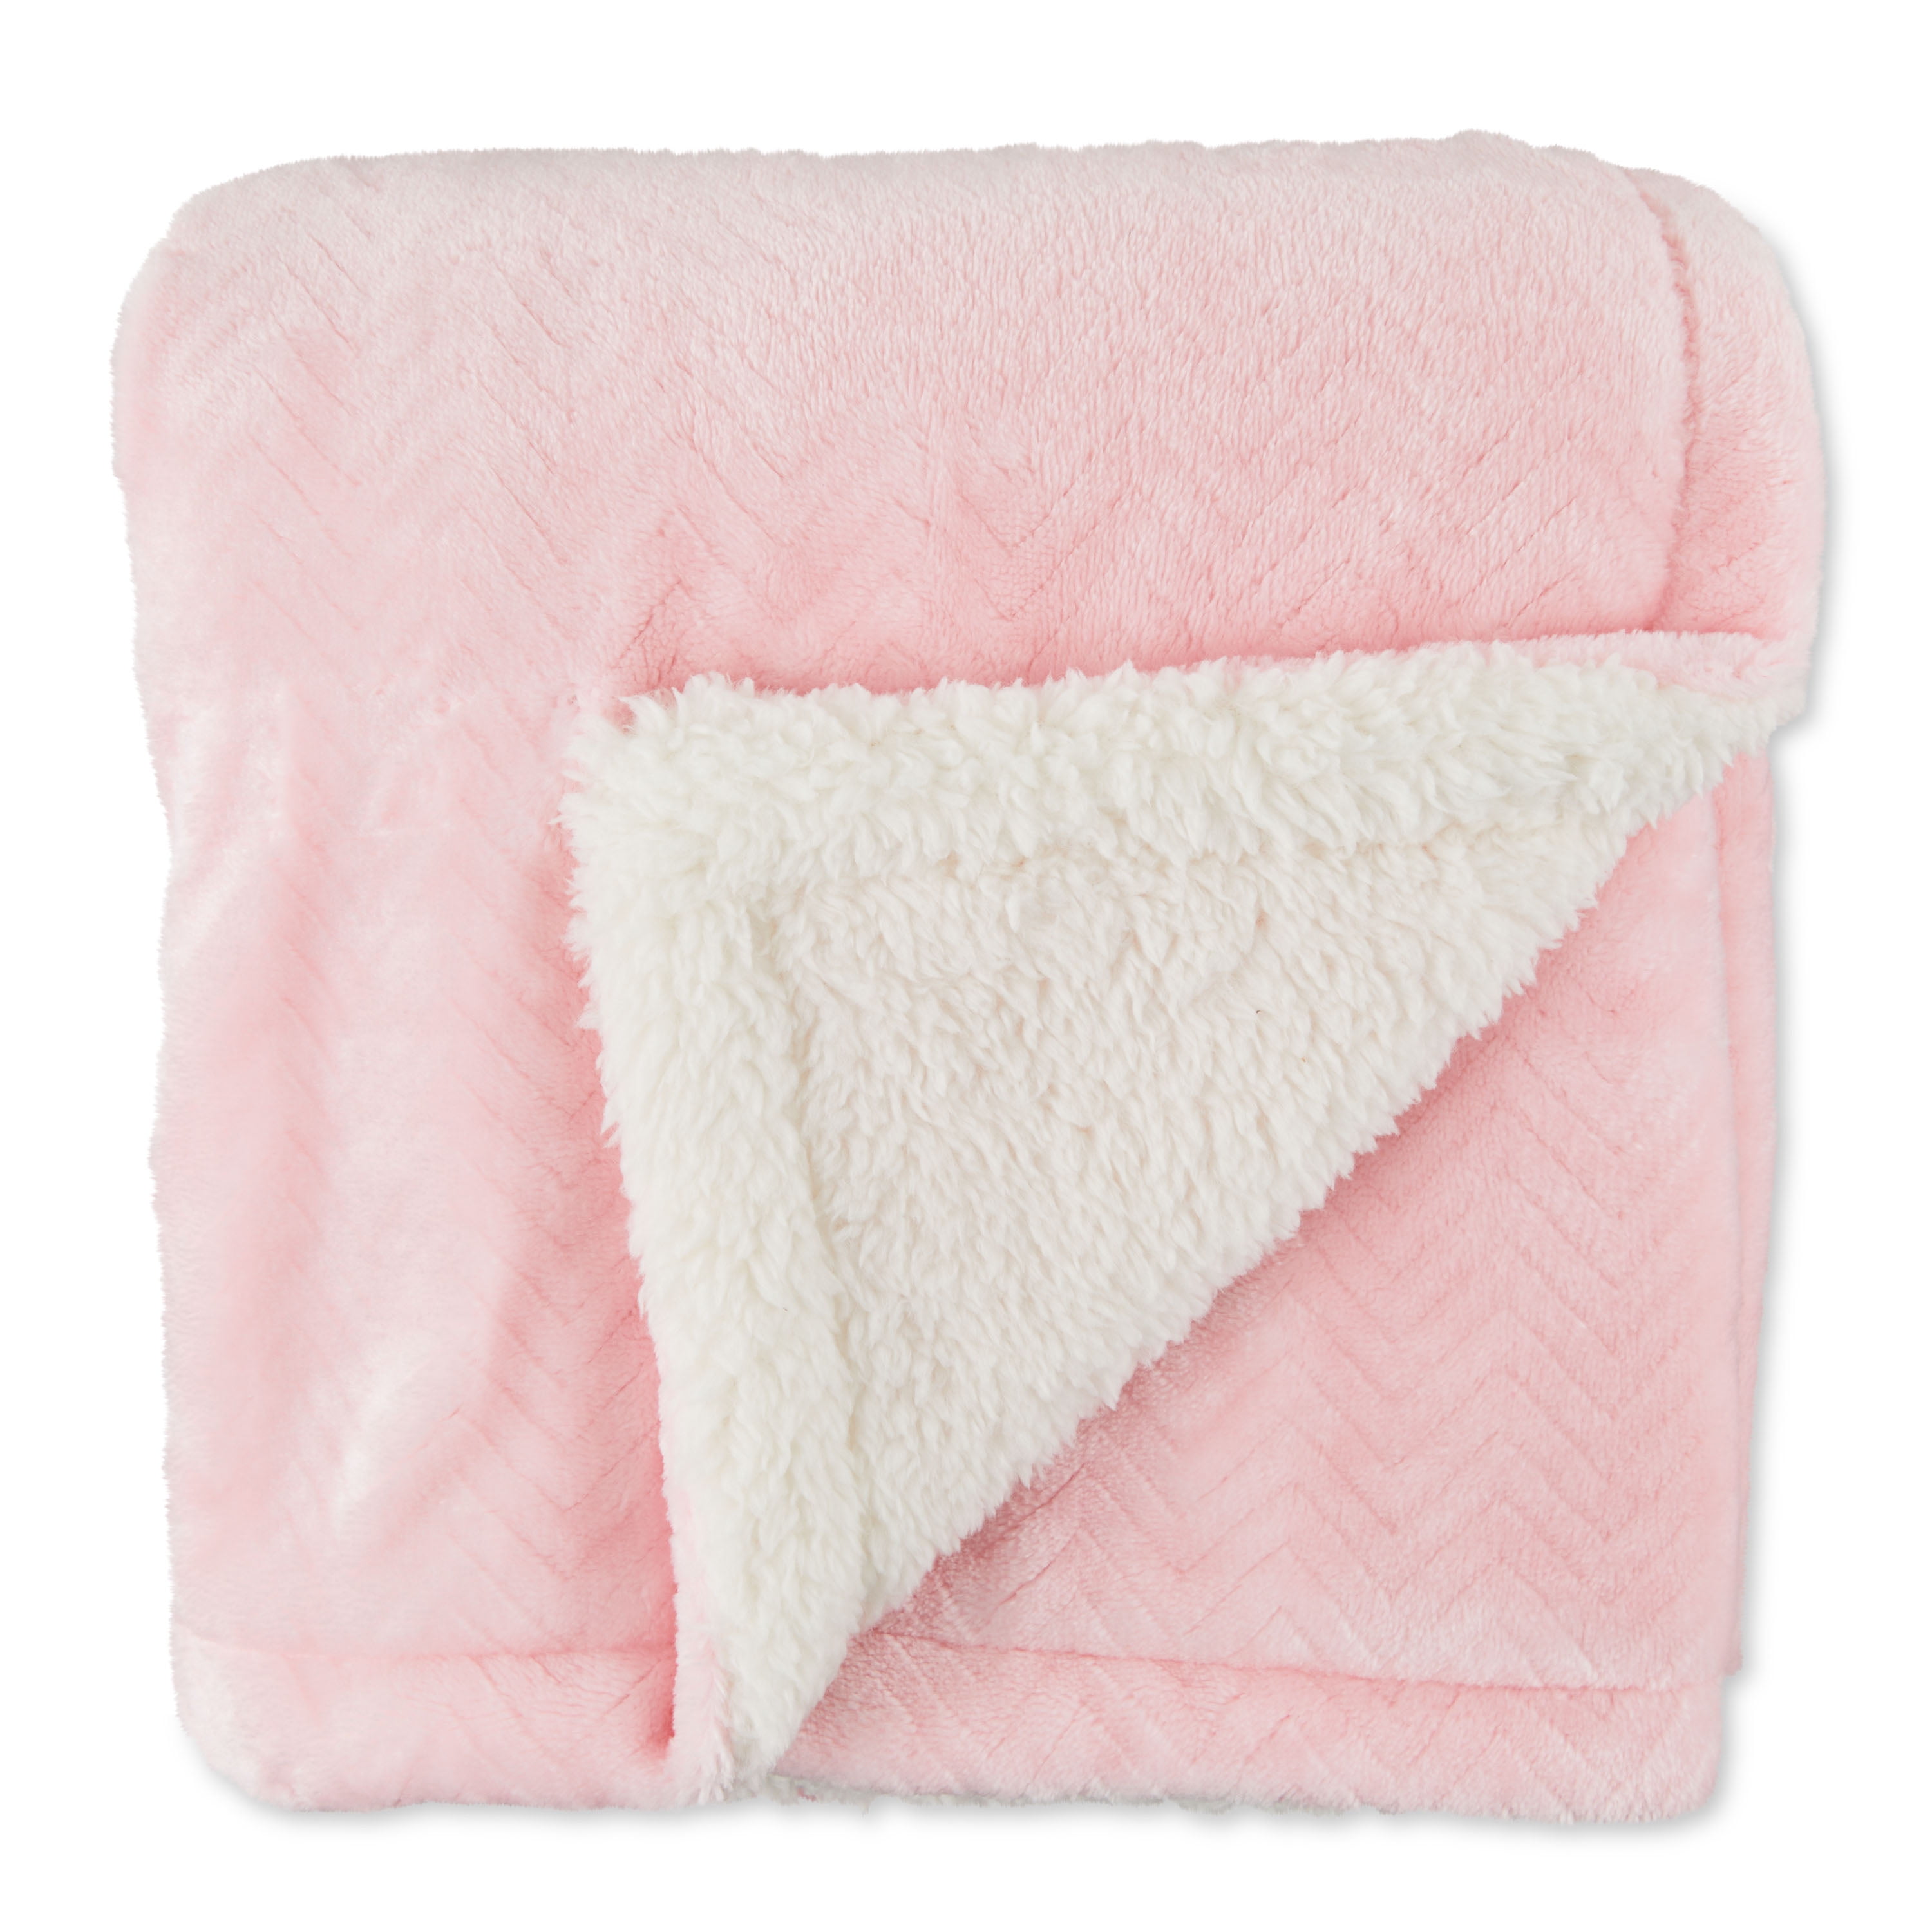 Parent's Royal Plush Blanket for Baby Girls, Pink, 30 x 40